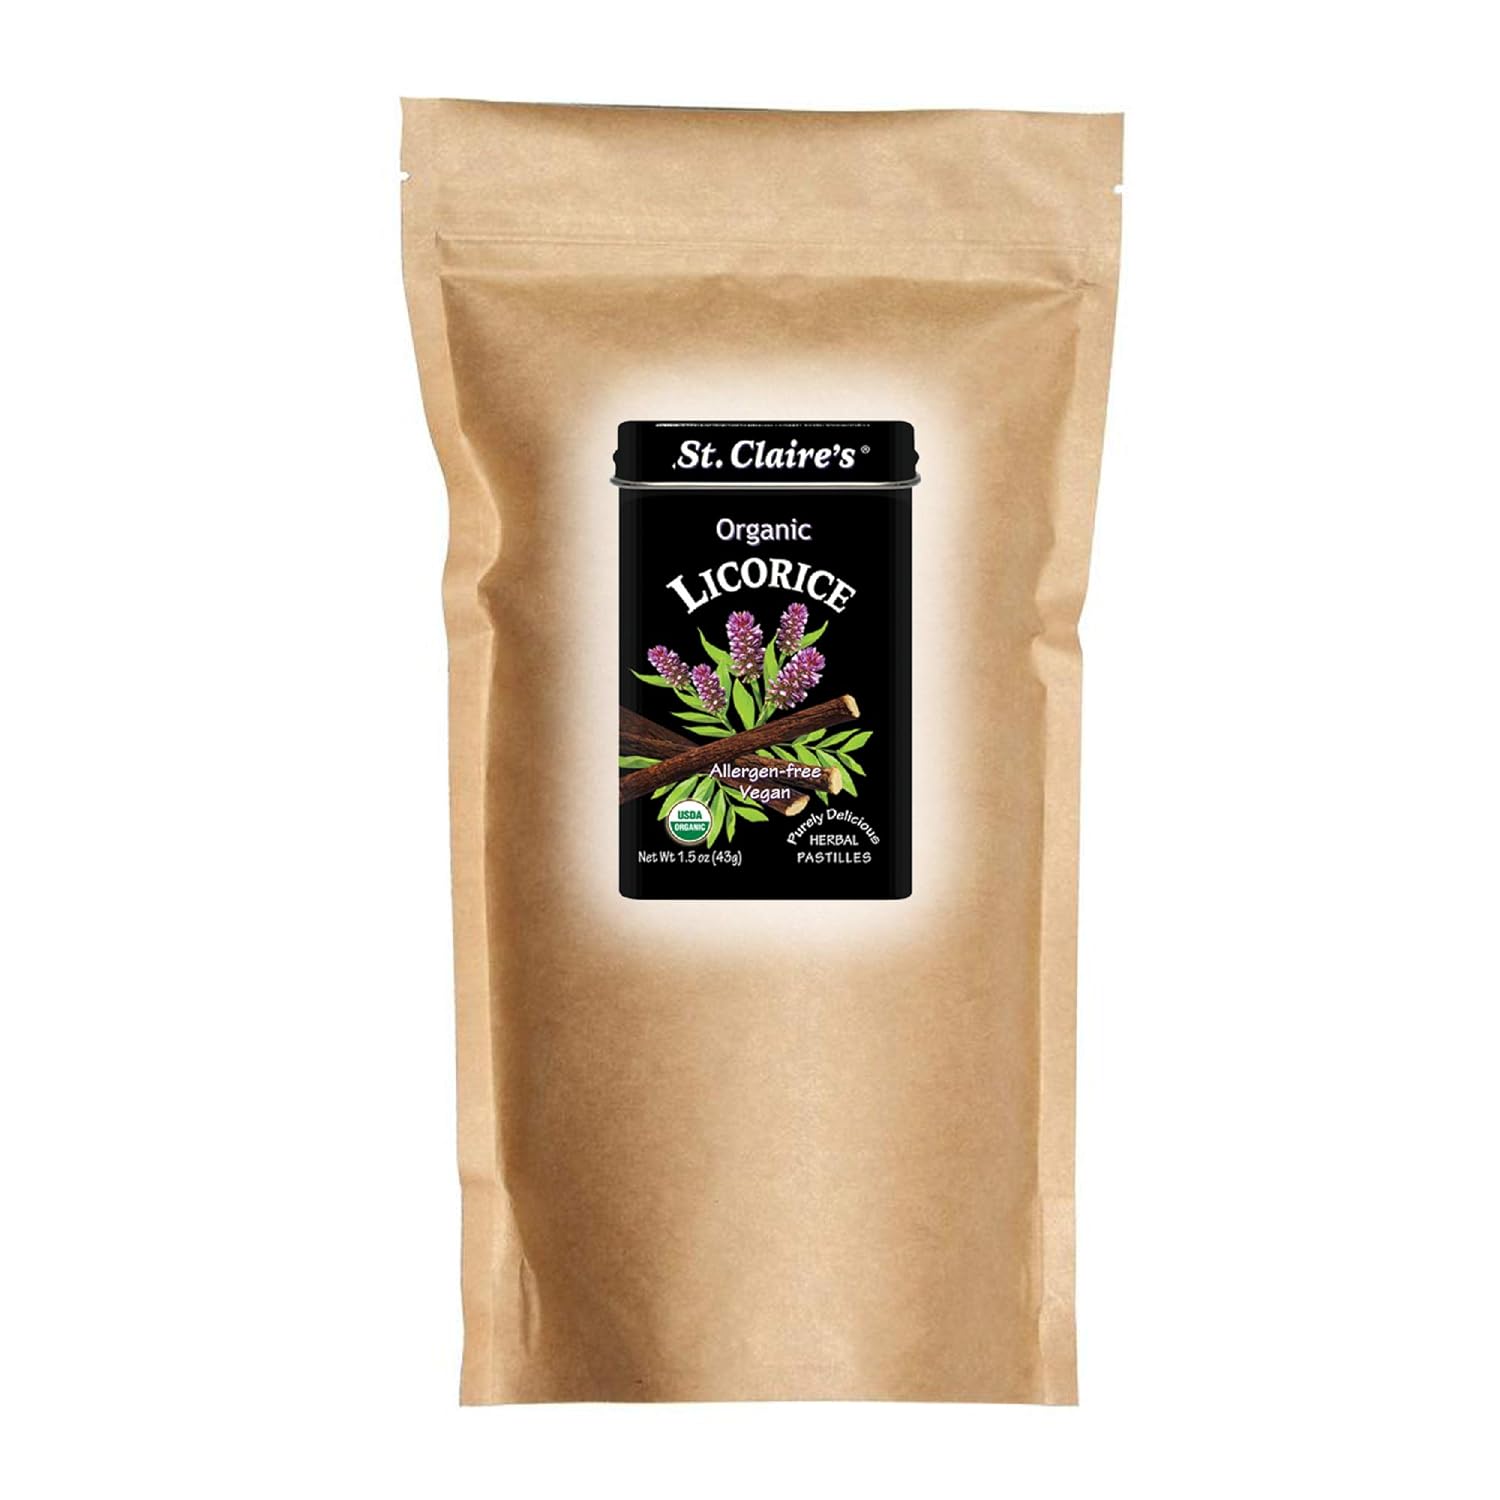 St. Claire's Organic Herbal Pastilles, (Licorice, 27 Ounce Bag, over 800 pieces) | Gluten-Free, Vegan, GMO-Free, Plant-based, Allergen-Free | Made in our Allergen-Free facility